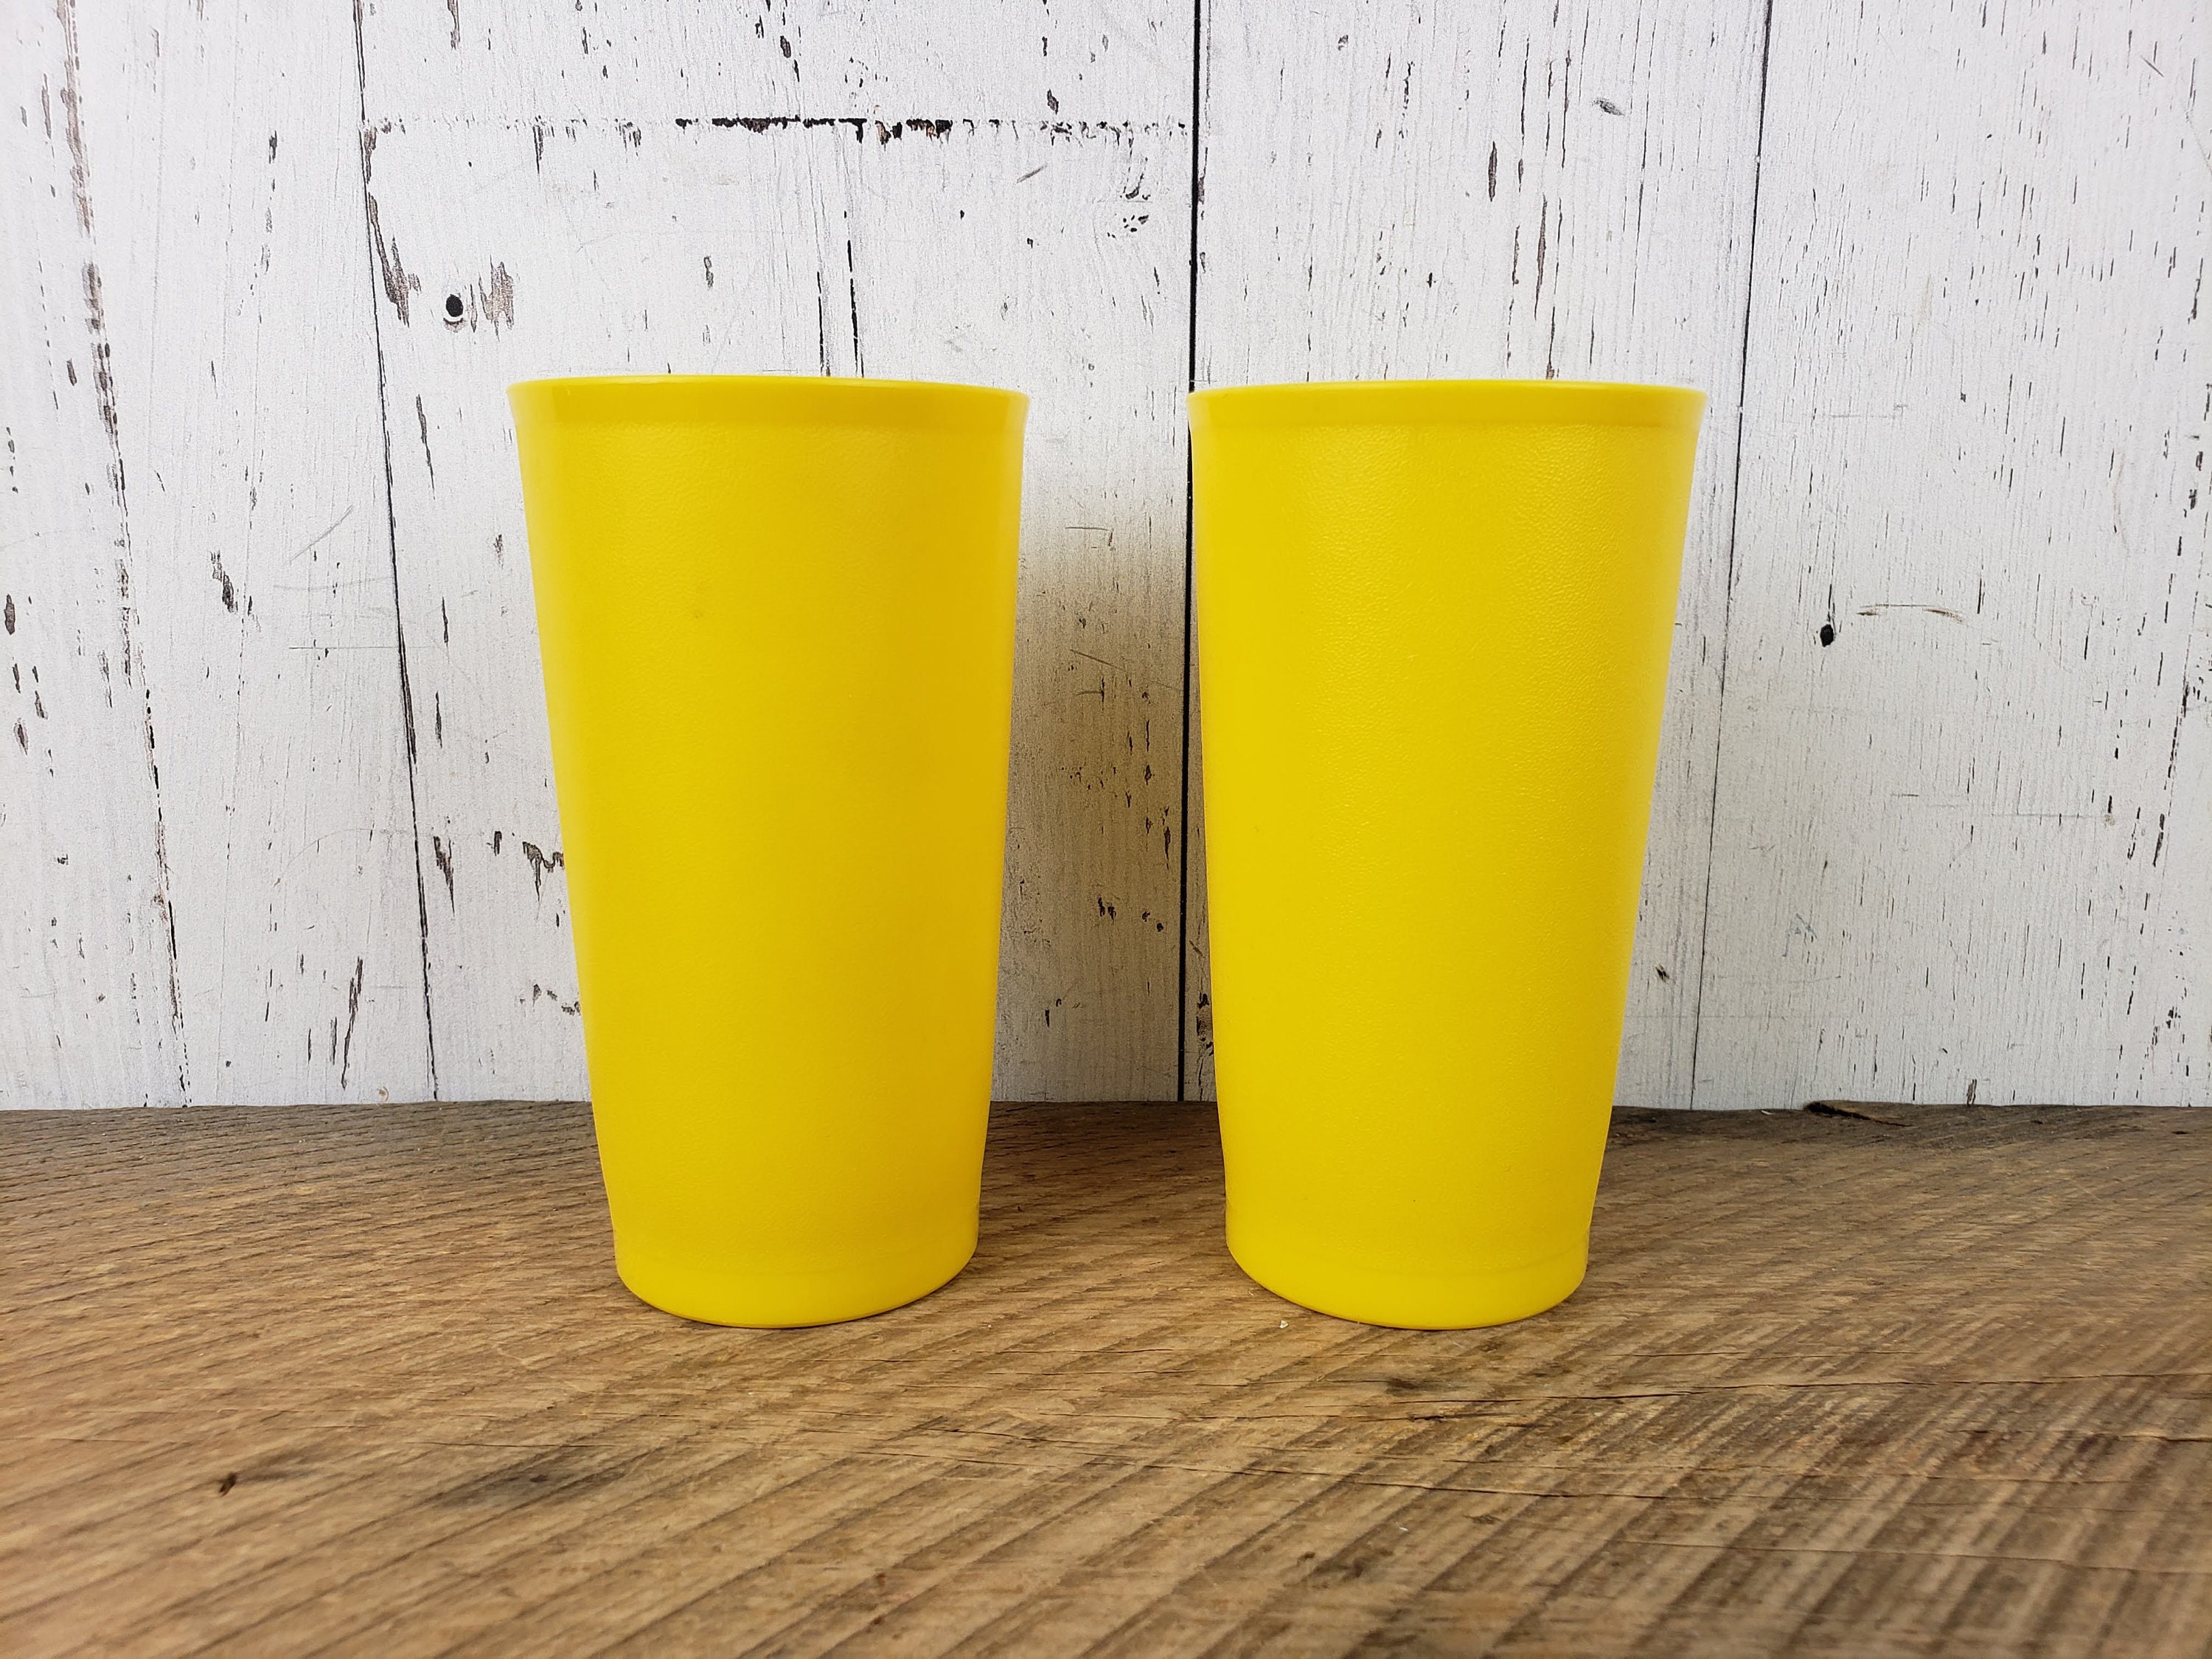 4 Vintage Tupperware Tumblers Tall Cups Glasses Plastic Tupper Ware Storage  Container 873 Large Stacking Yellow 70s Wedding Gift Kitchen 